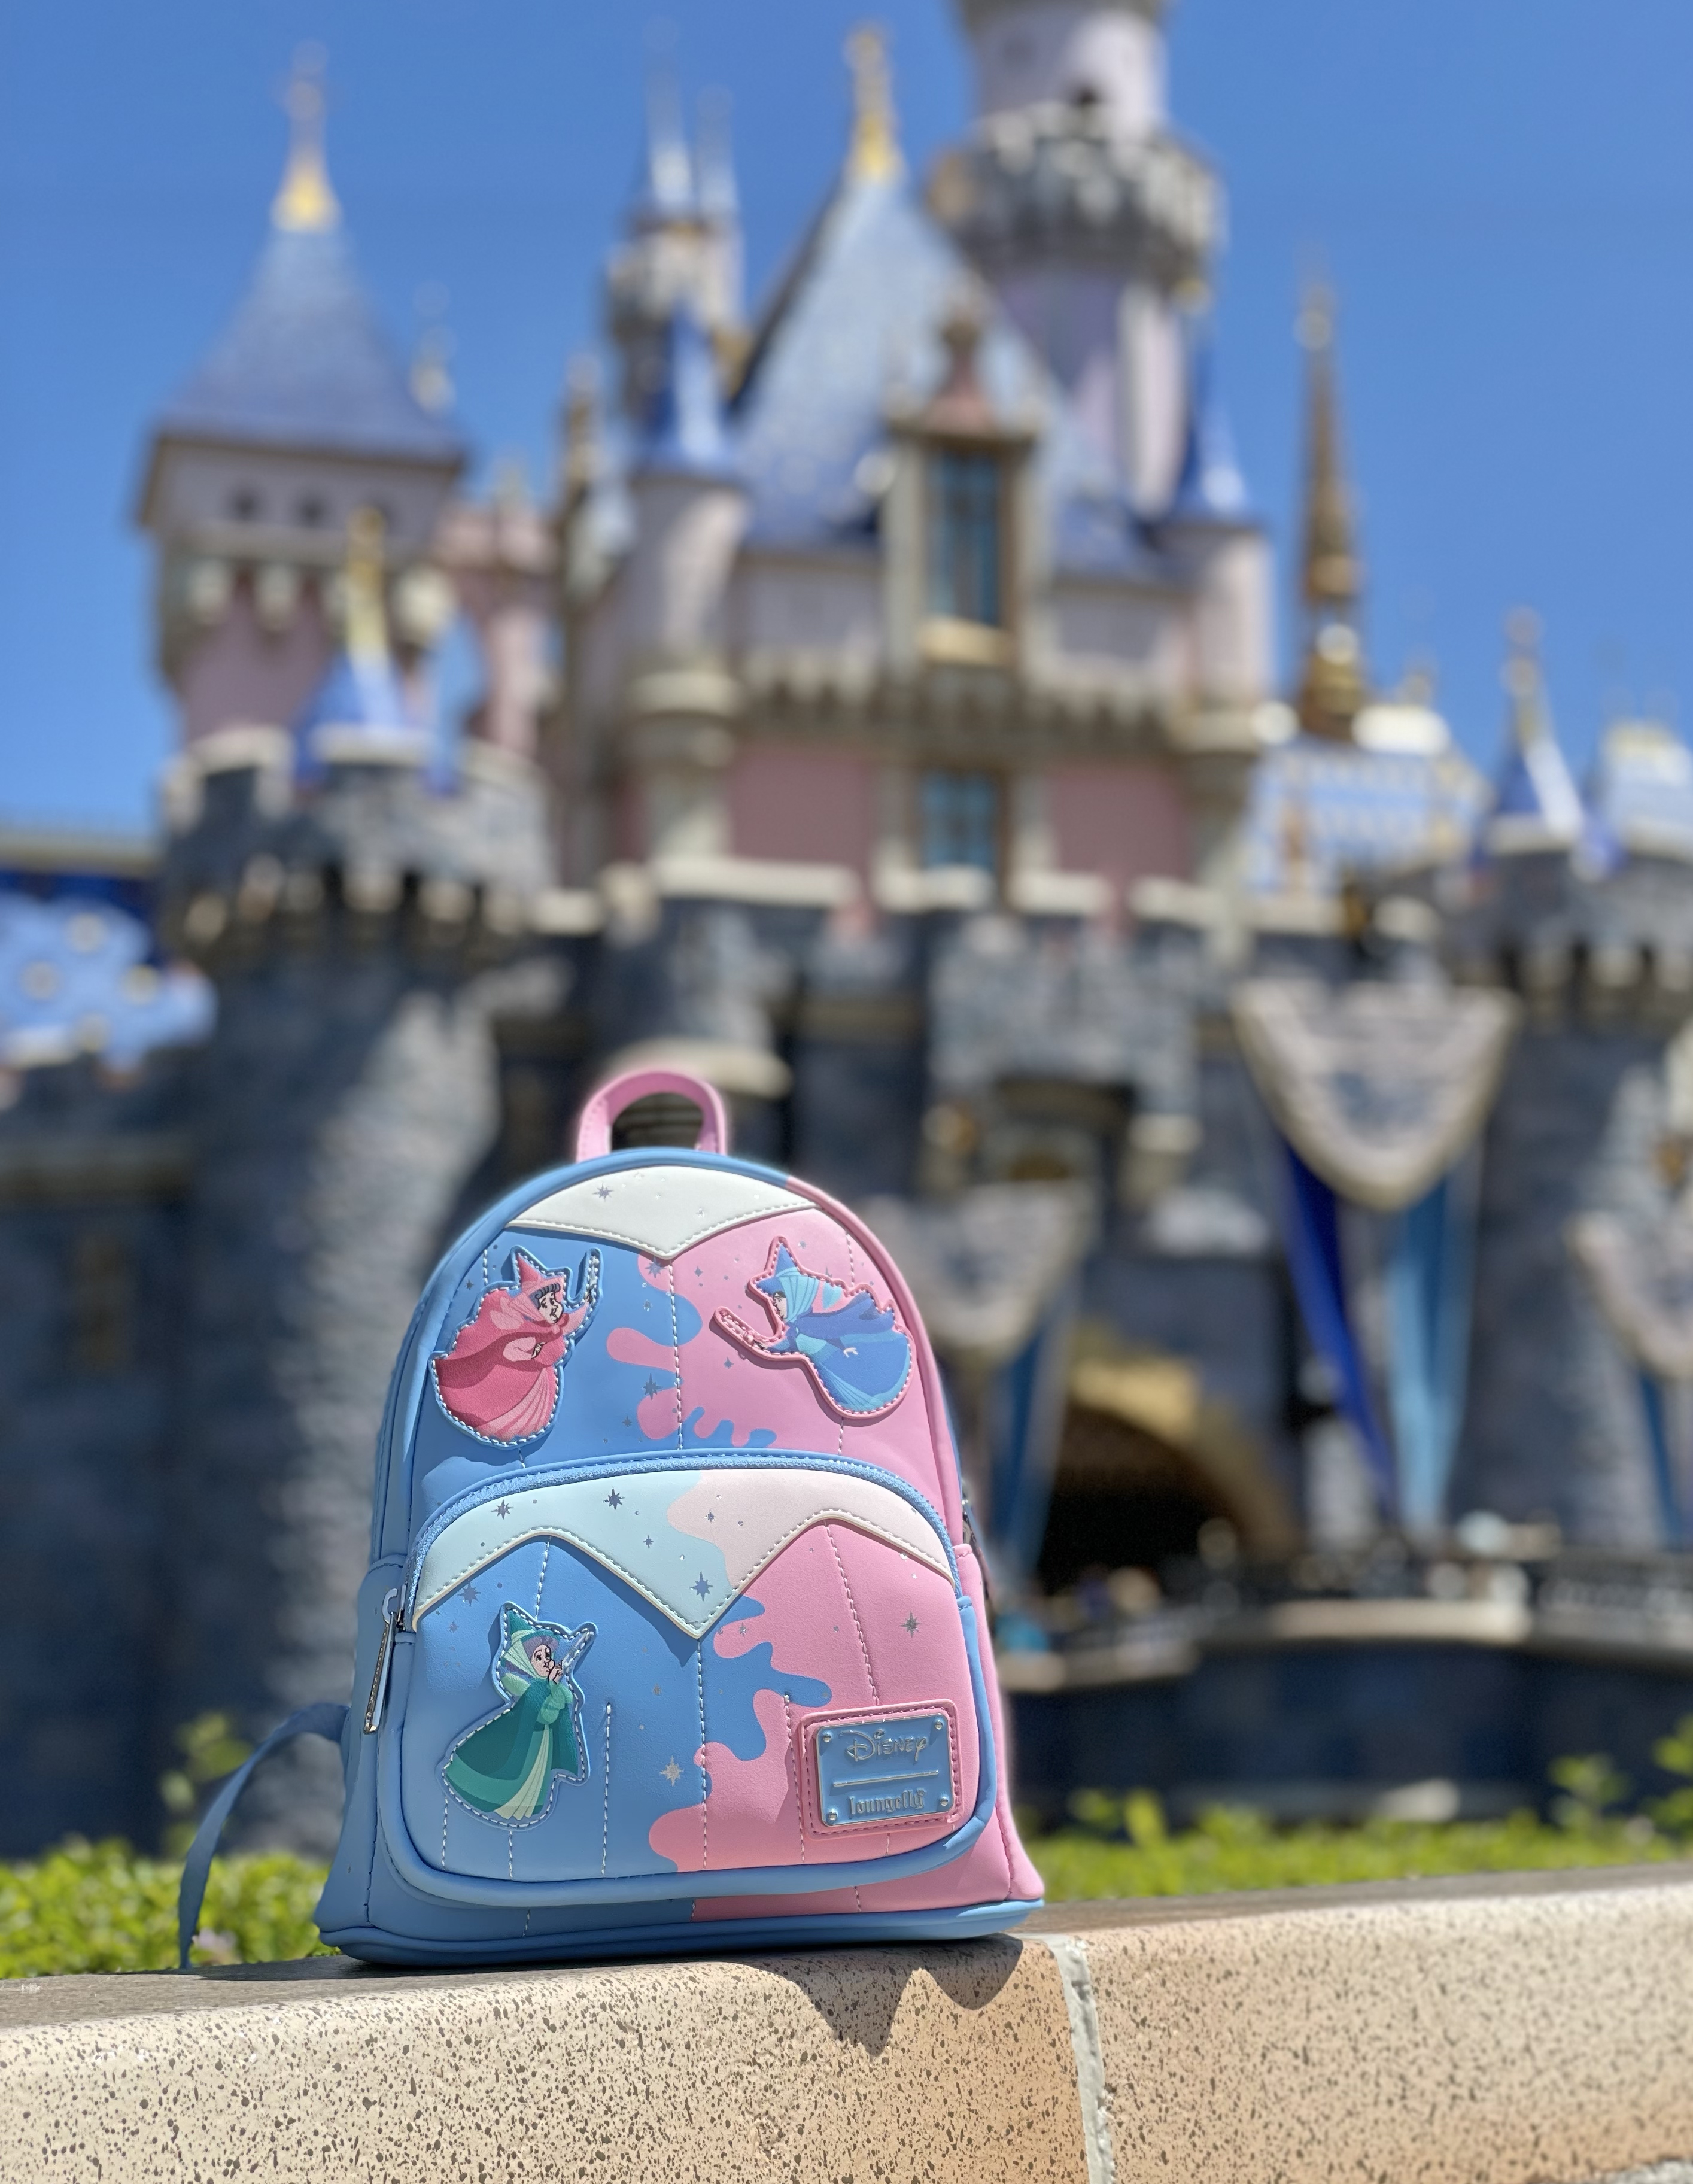 The Loungefly x Disney Sleeping Beauty Make It Blue Make It Pink Purse  Funko website is the best place to shop for the most extensive variety of  products available online